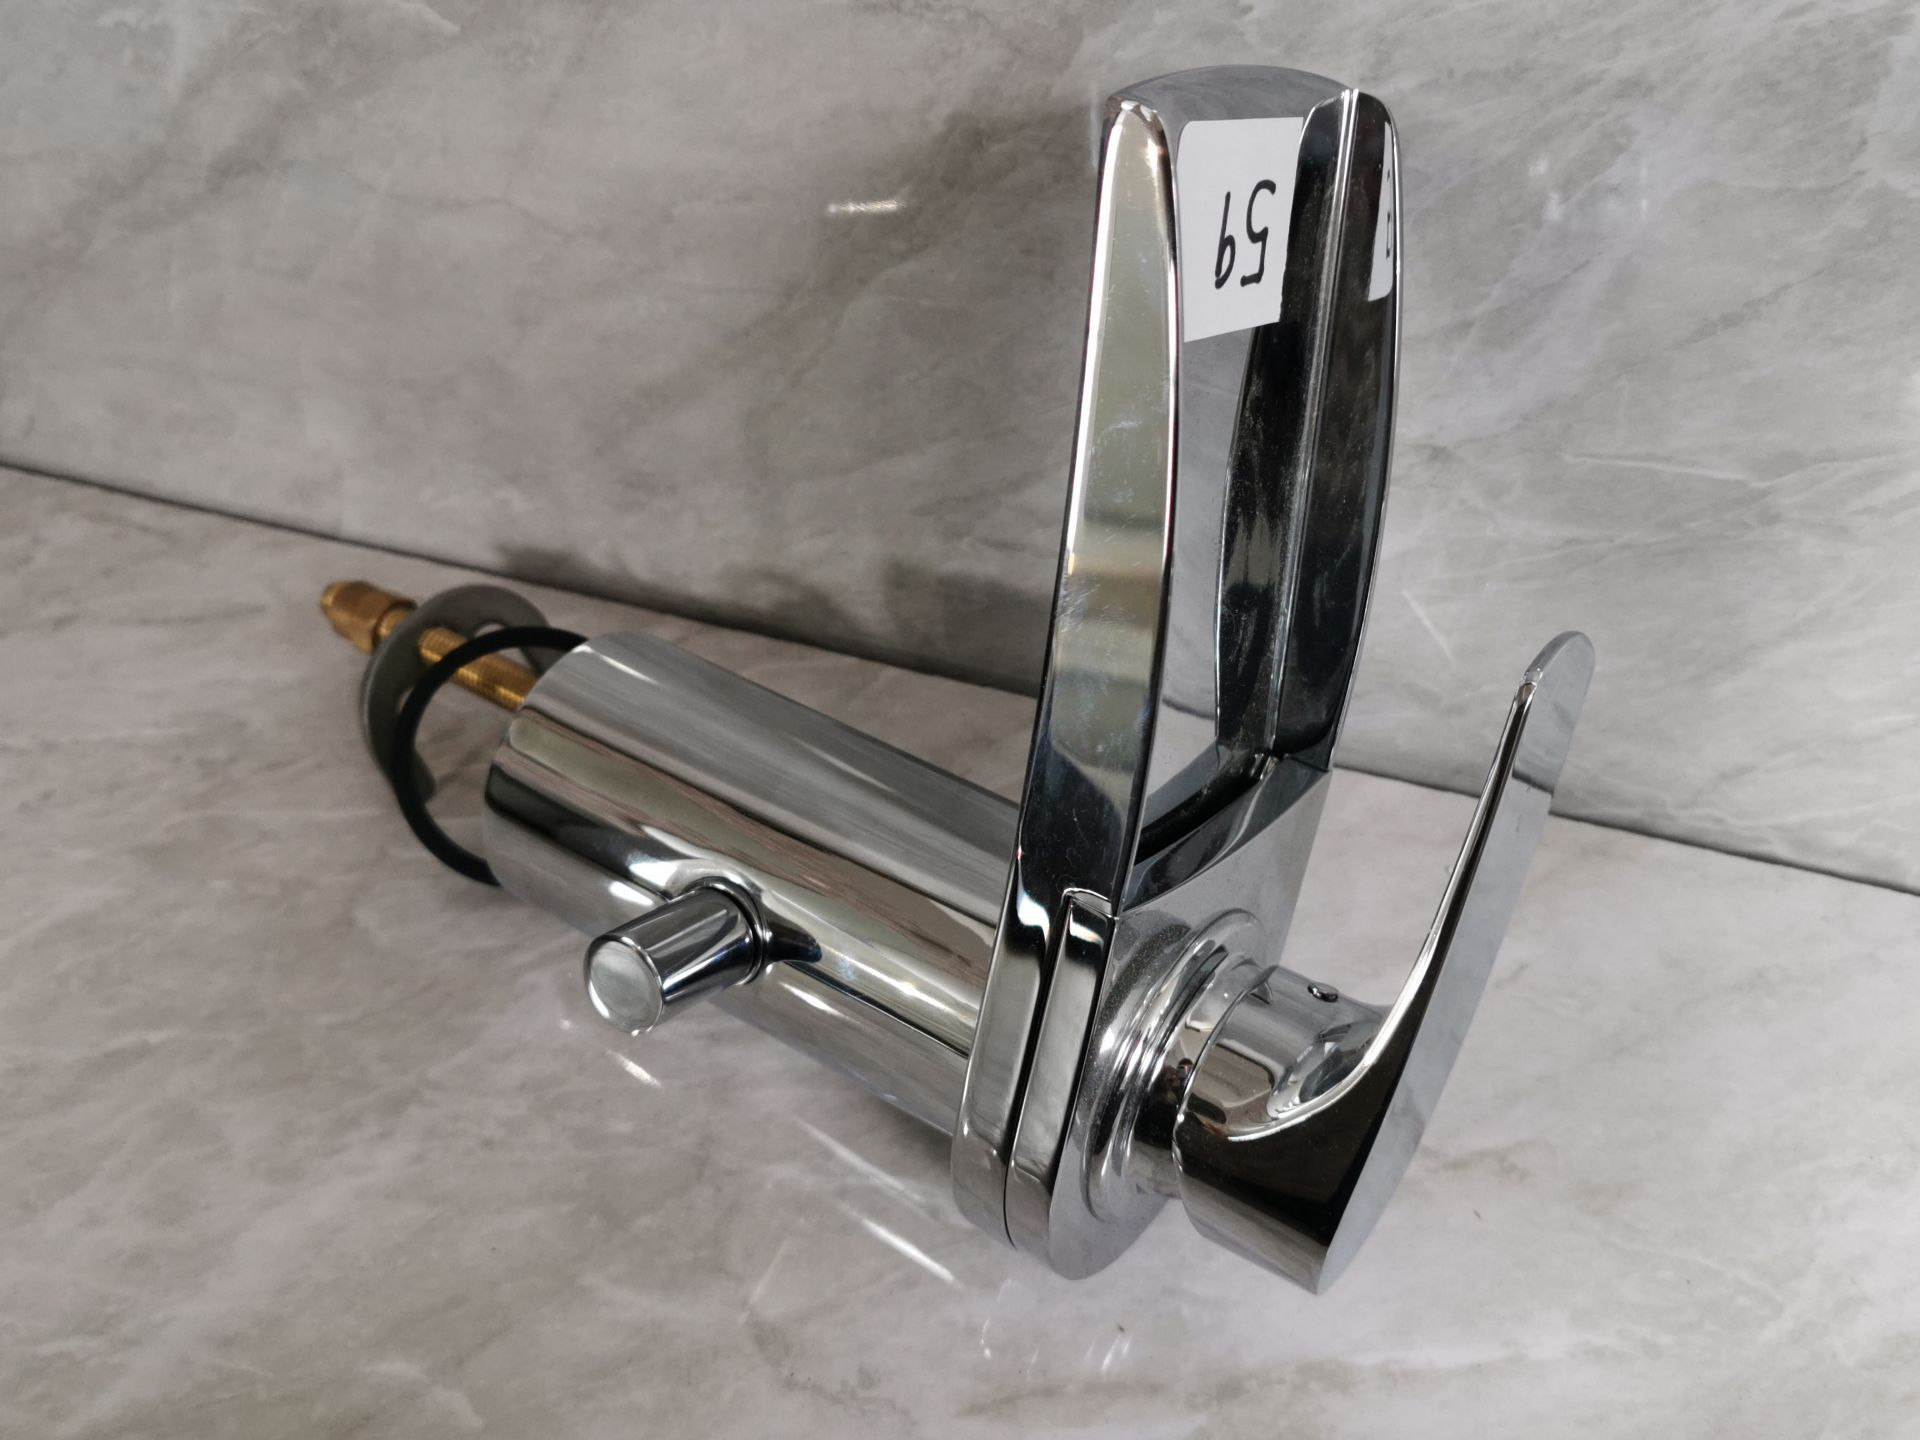 Luxury Deck-Mounted Waterfall Bath Filler Tap Unit RRP £489 - Image 2 of 2